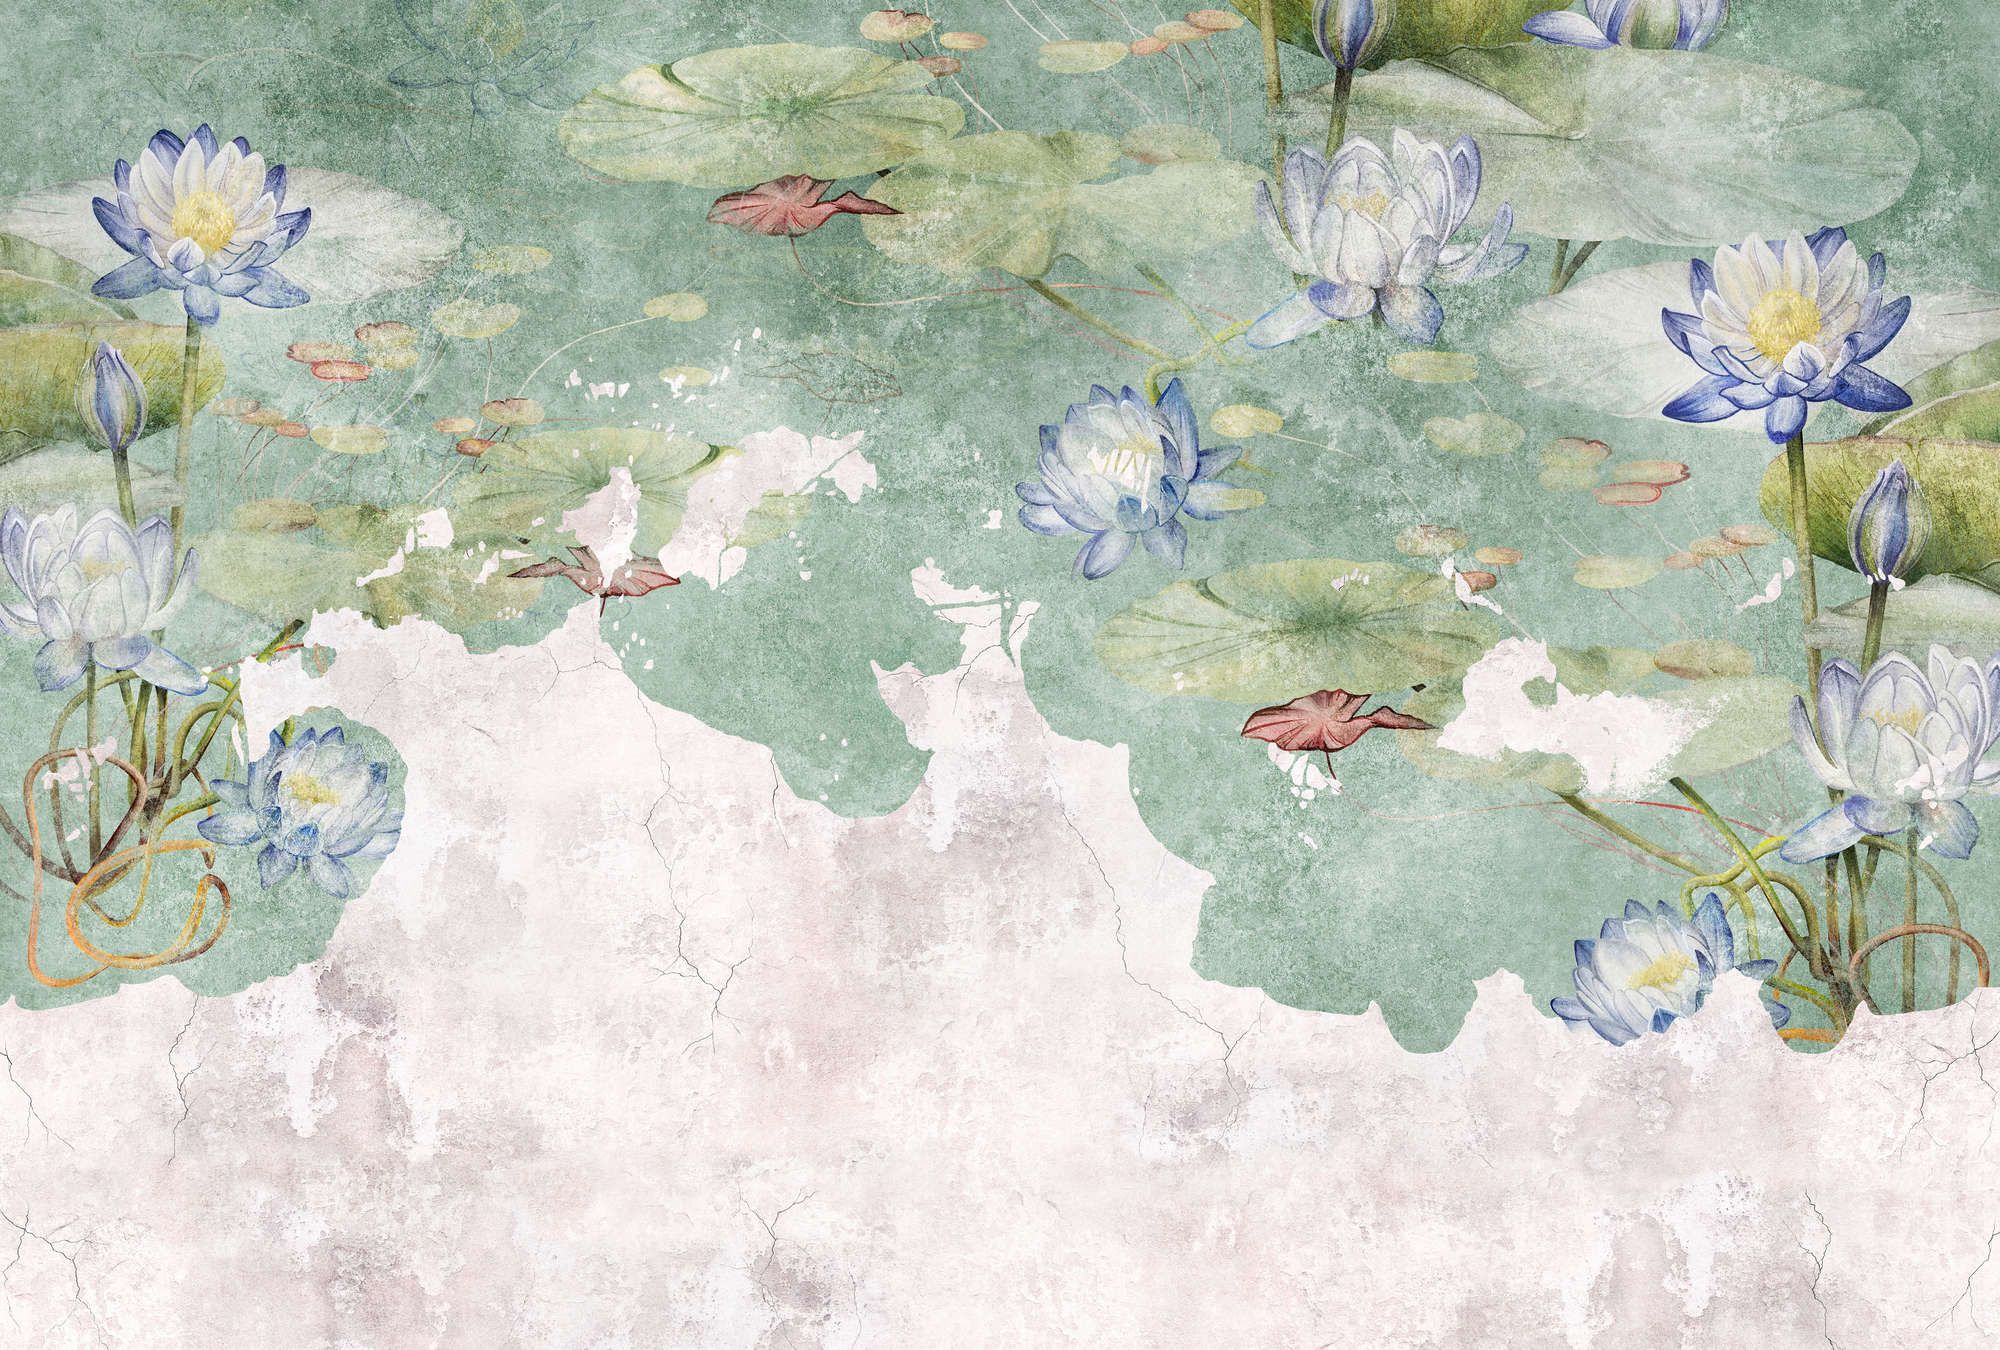             Photo wallpaper »lily« - Water lilies on vintage plaster structure in the background - Lightly textured non-woven fabric
        